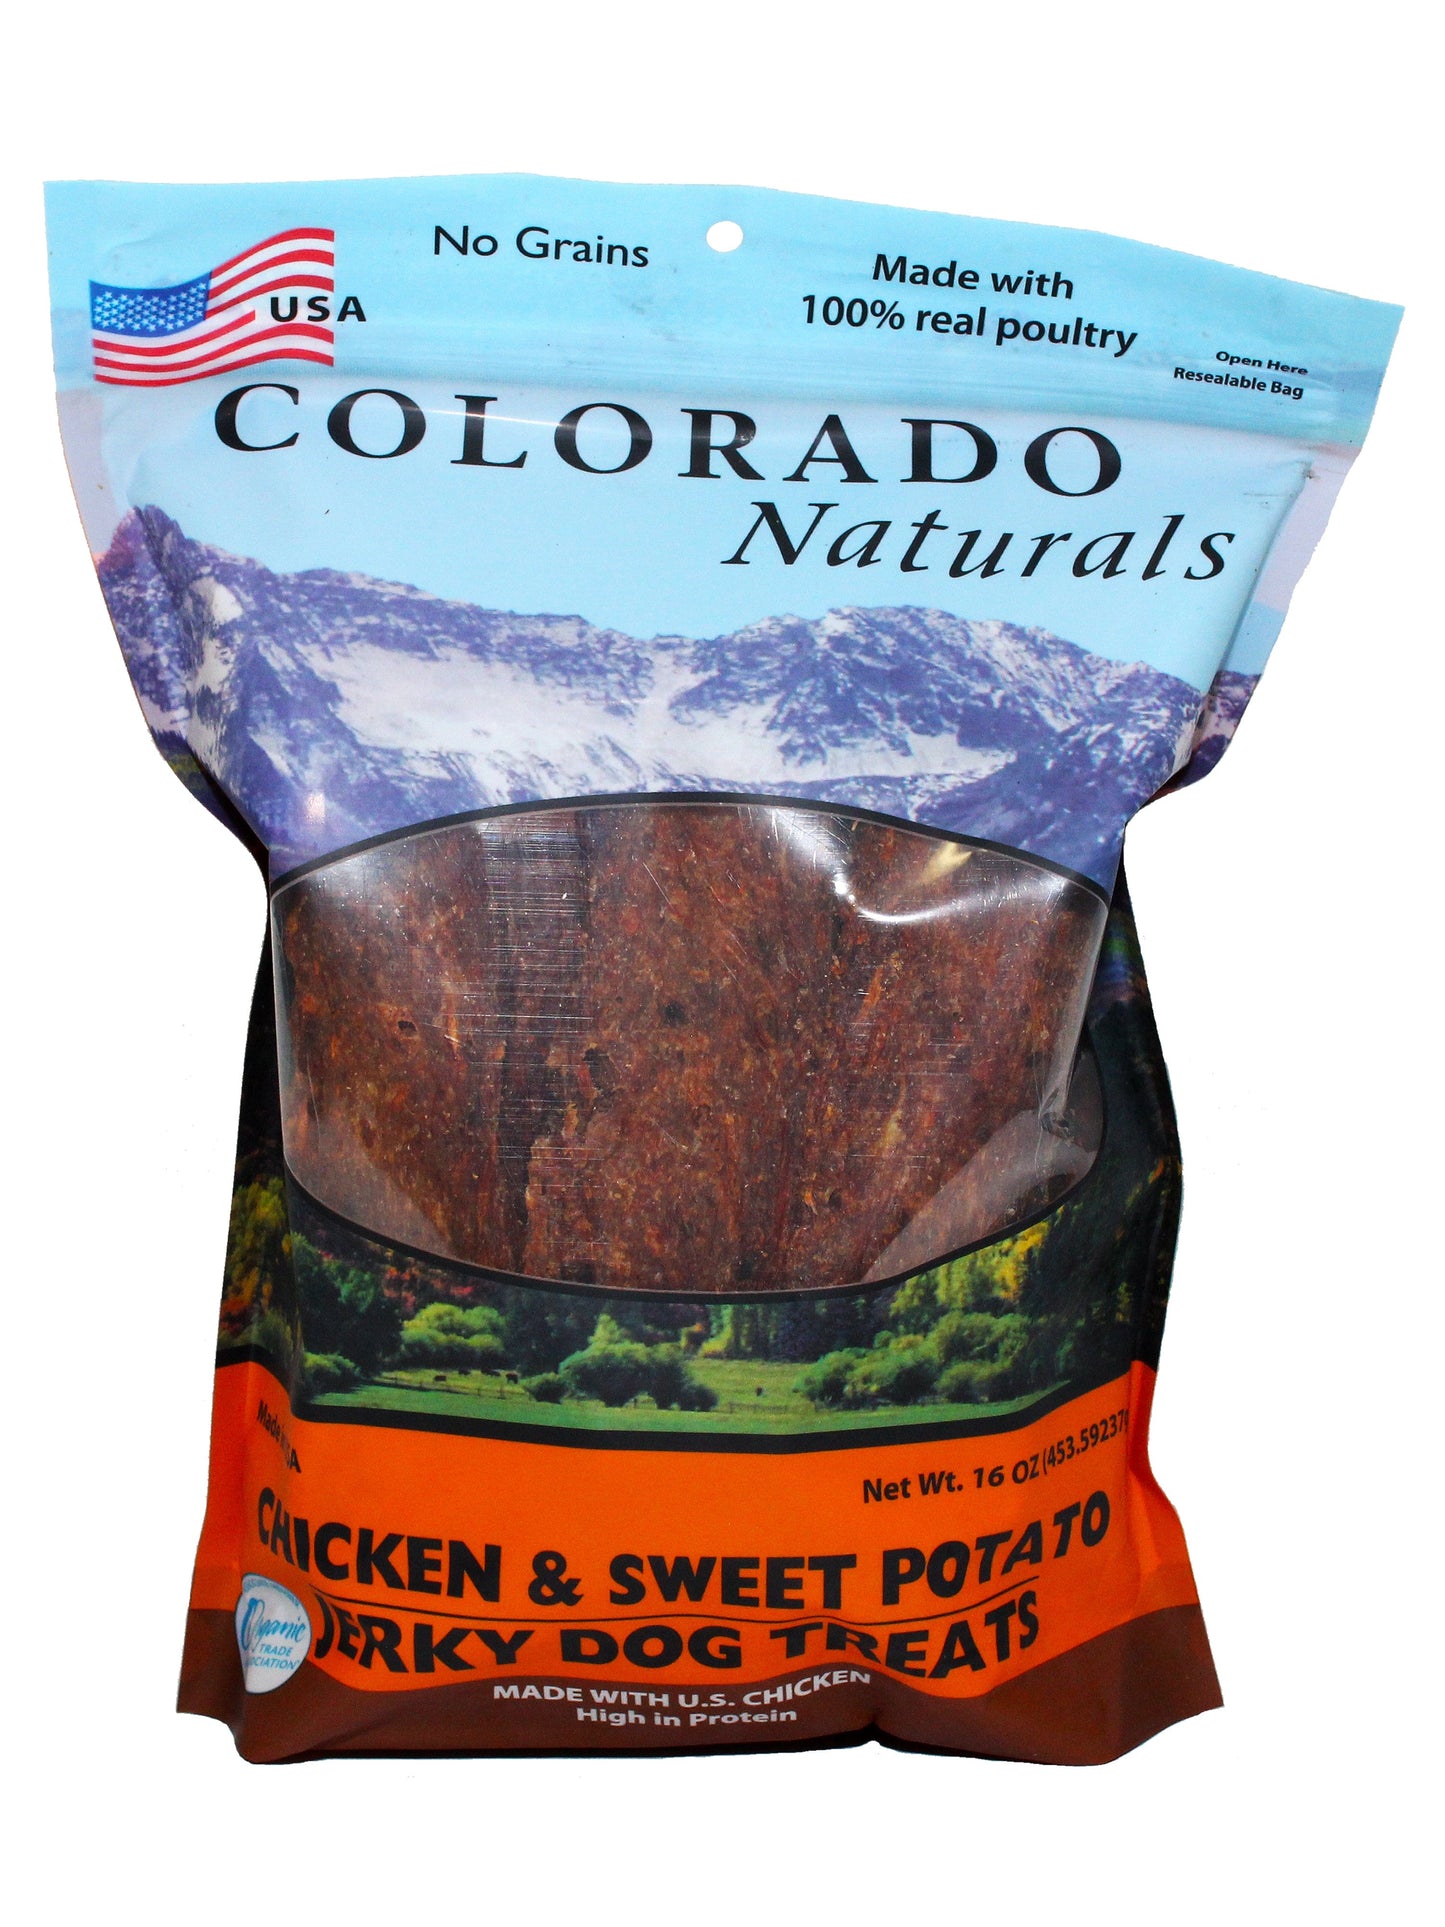 A photo of the front of the best 16 oz Chicken and Sweet Potato Jerky Dog Treats from Colorado Pet Treats by Colorado Naturals. Colorado Pet Treats - All-Natural, All-American Dog Jerky, Jerky Chips, and Bones - Treat your furry friend to our delicious and healthy pet treats made with only the finest ingredients sourced in the USA. Delicious and chewy all-American dog jerky made with natural ingredients sourced in Colorado.